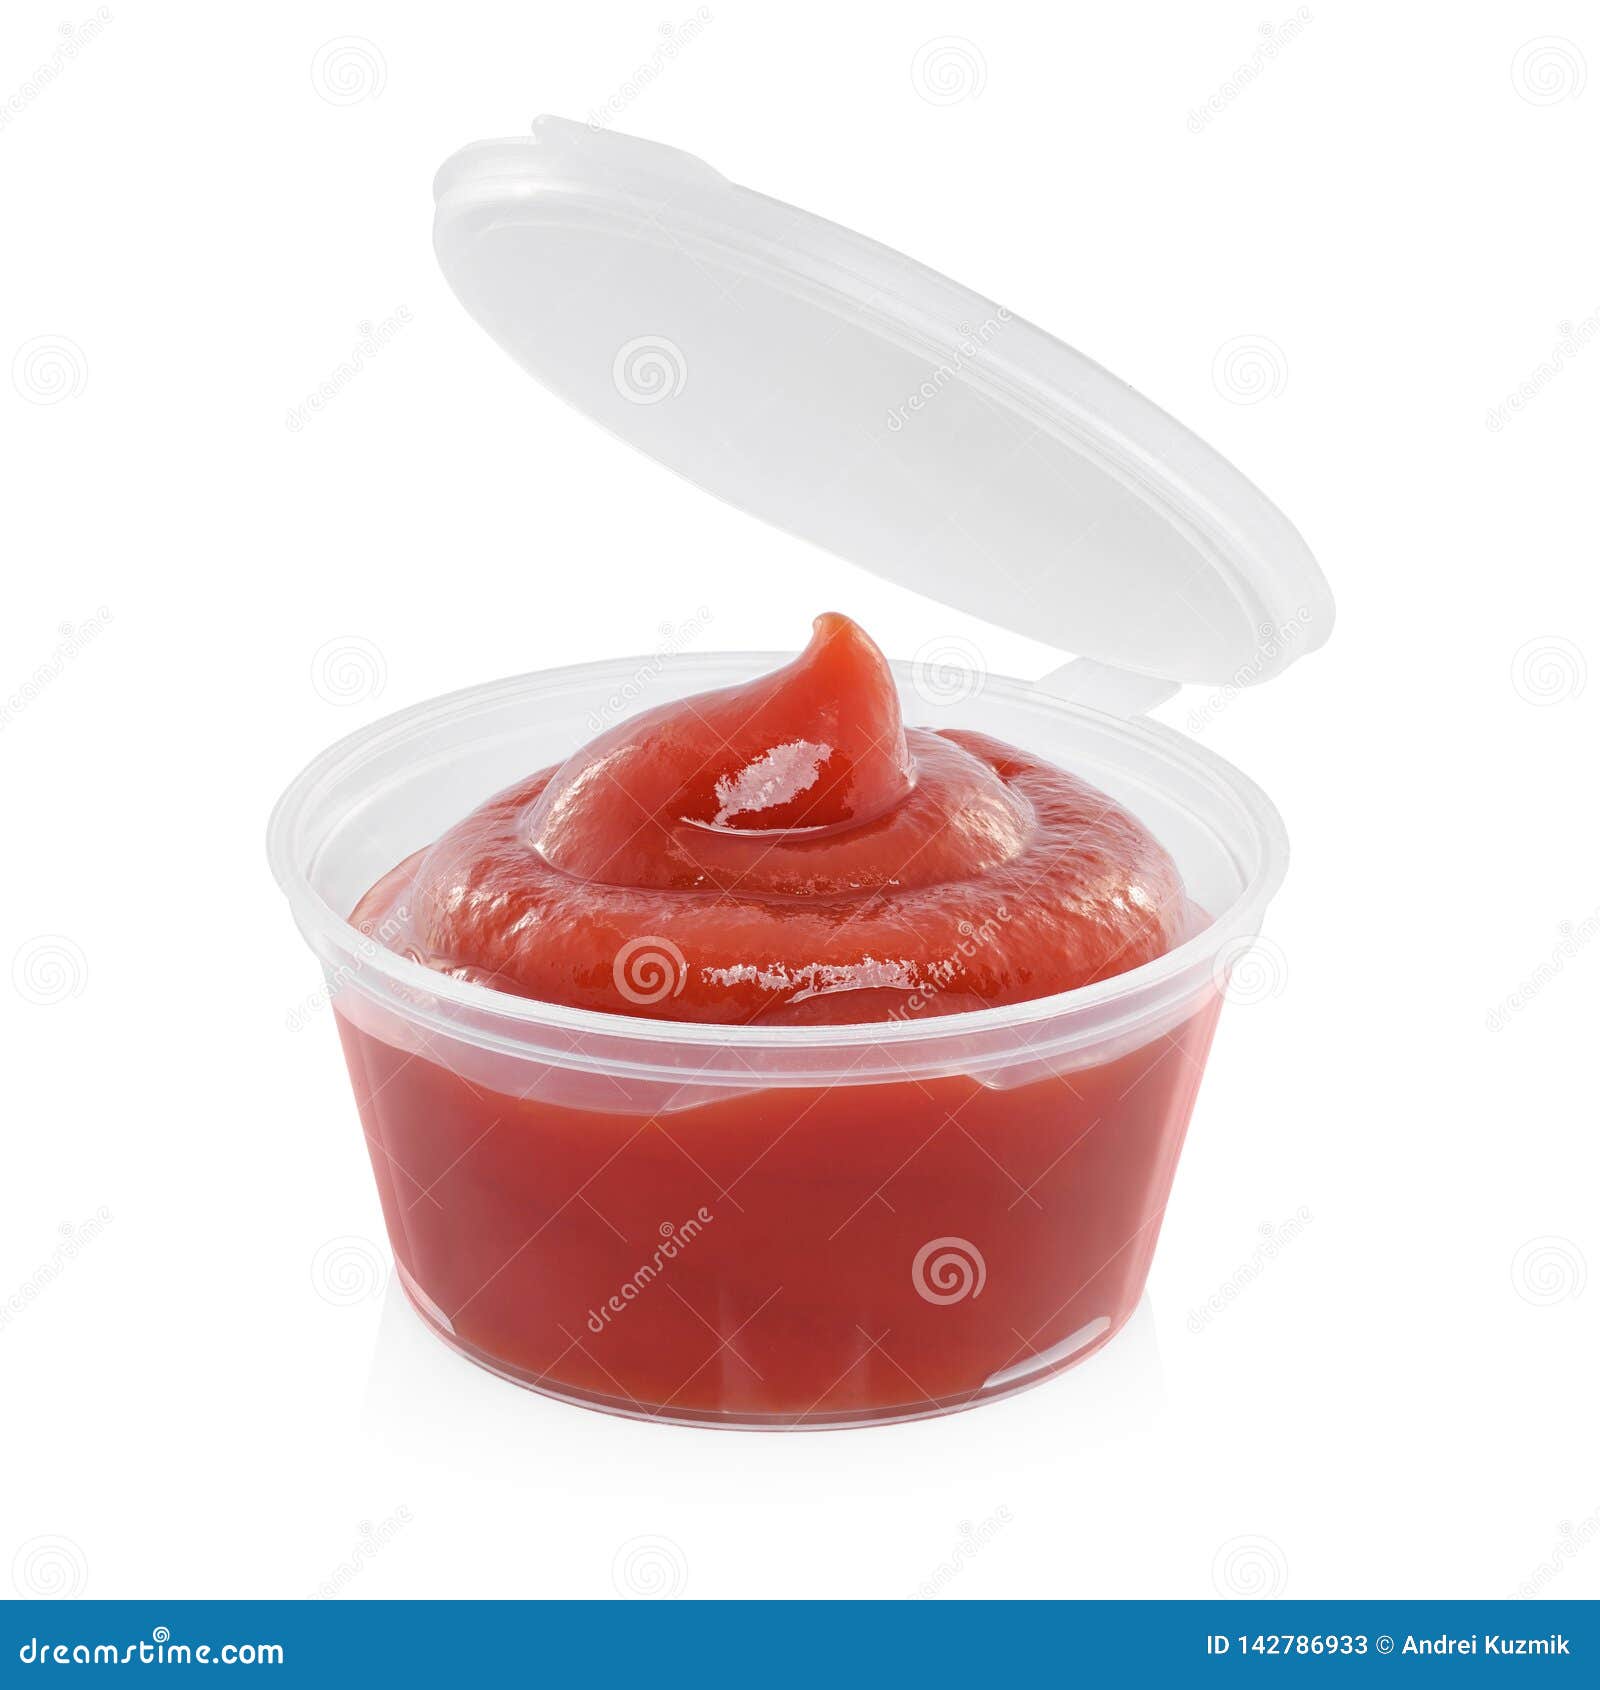 https://thumbs.dreamstime.com/z/ketchup-container-isolated-white-transparent-take-out-background-142786933.jpg